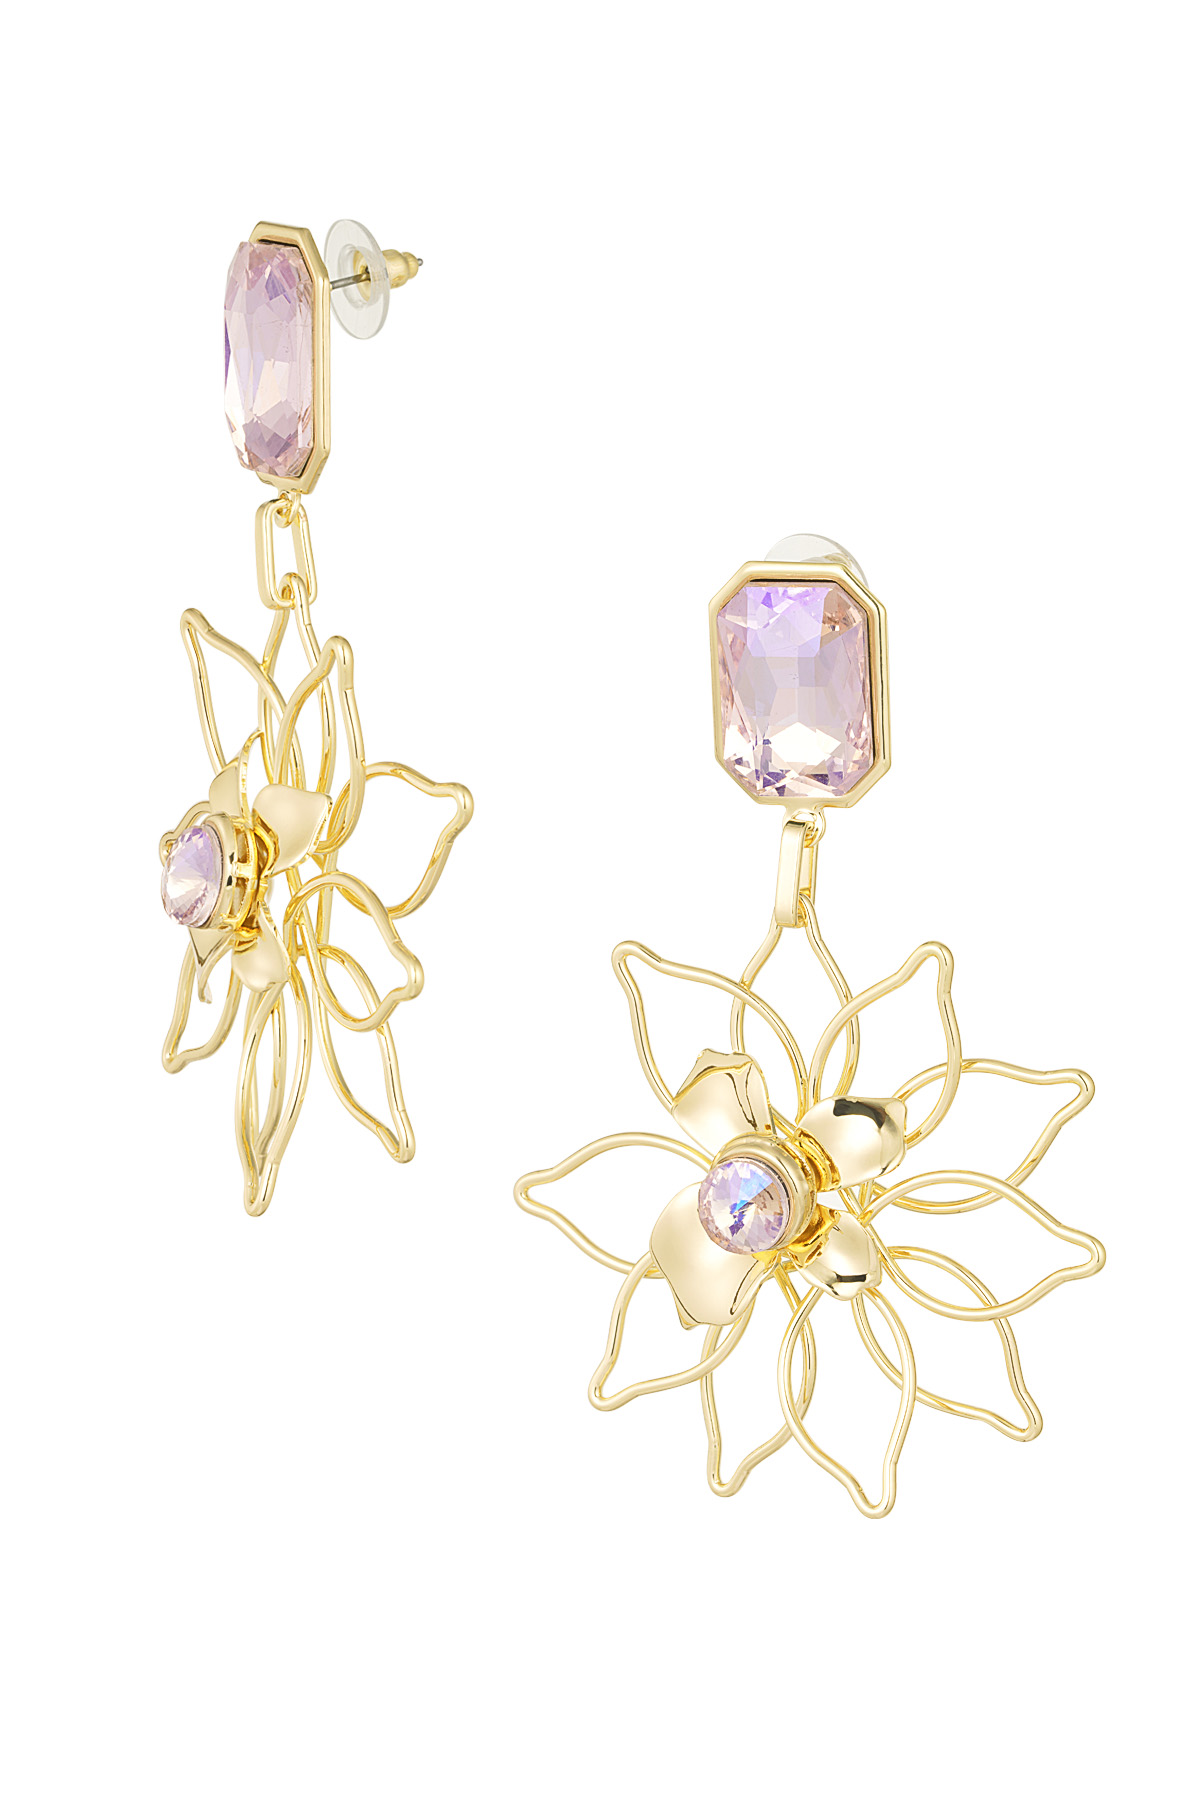 Sparkly earrings with flower pendant - pink h5 